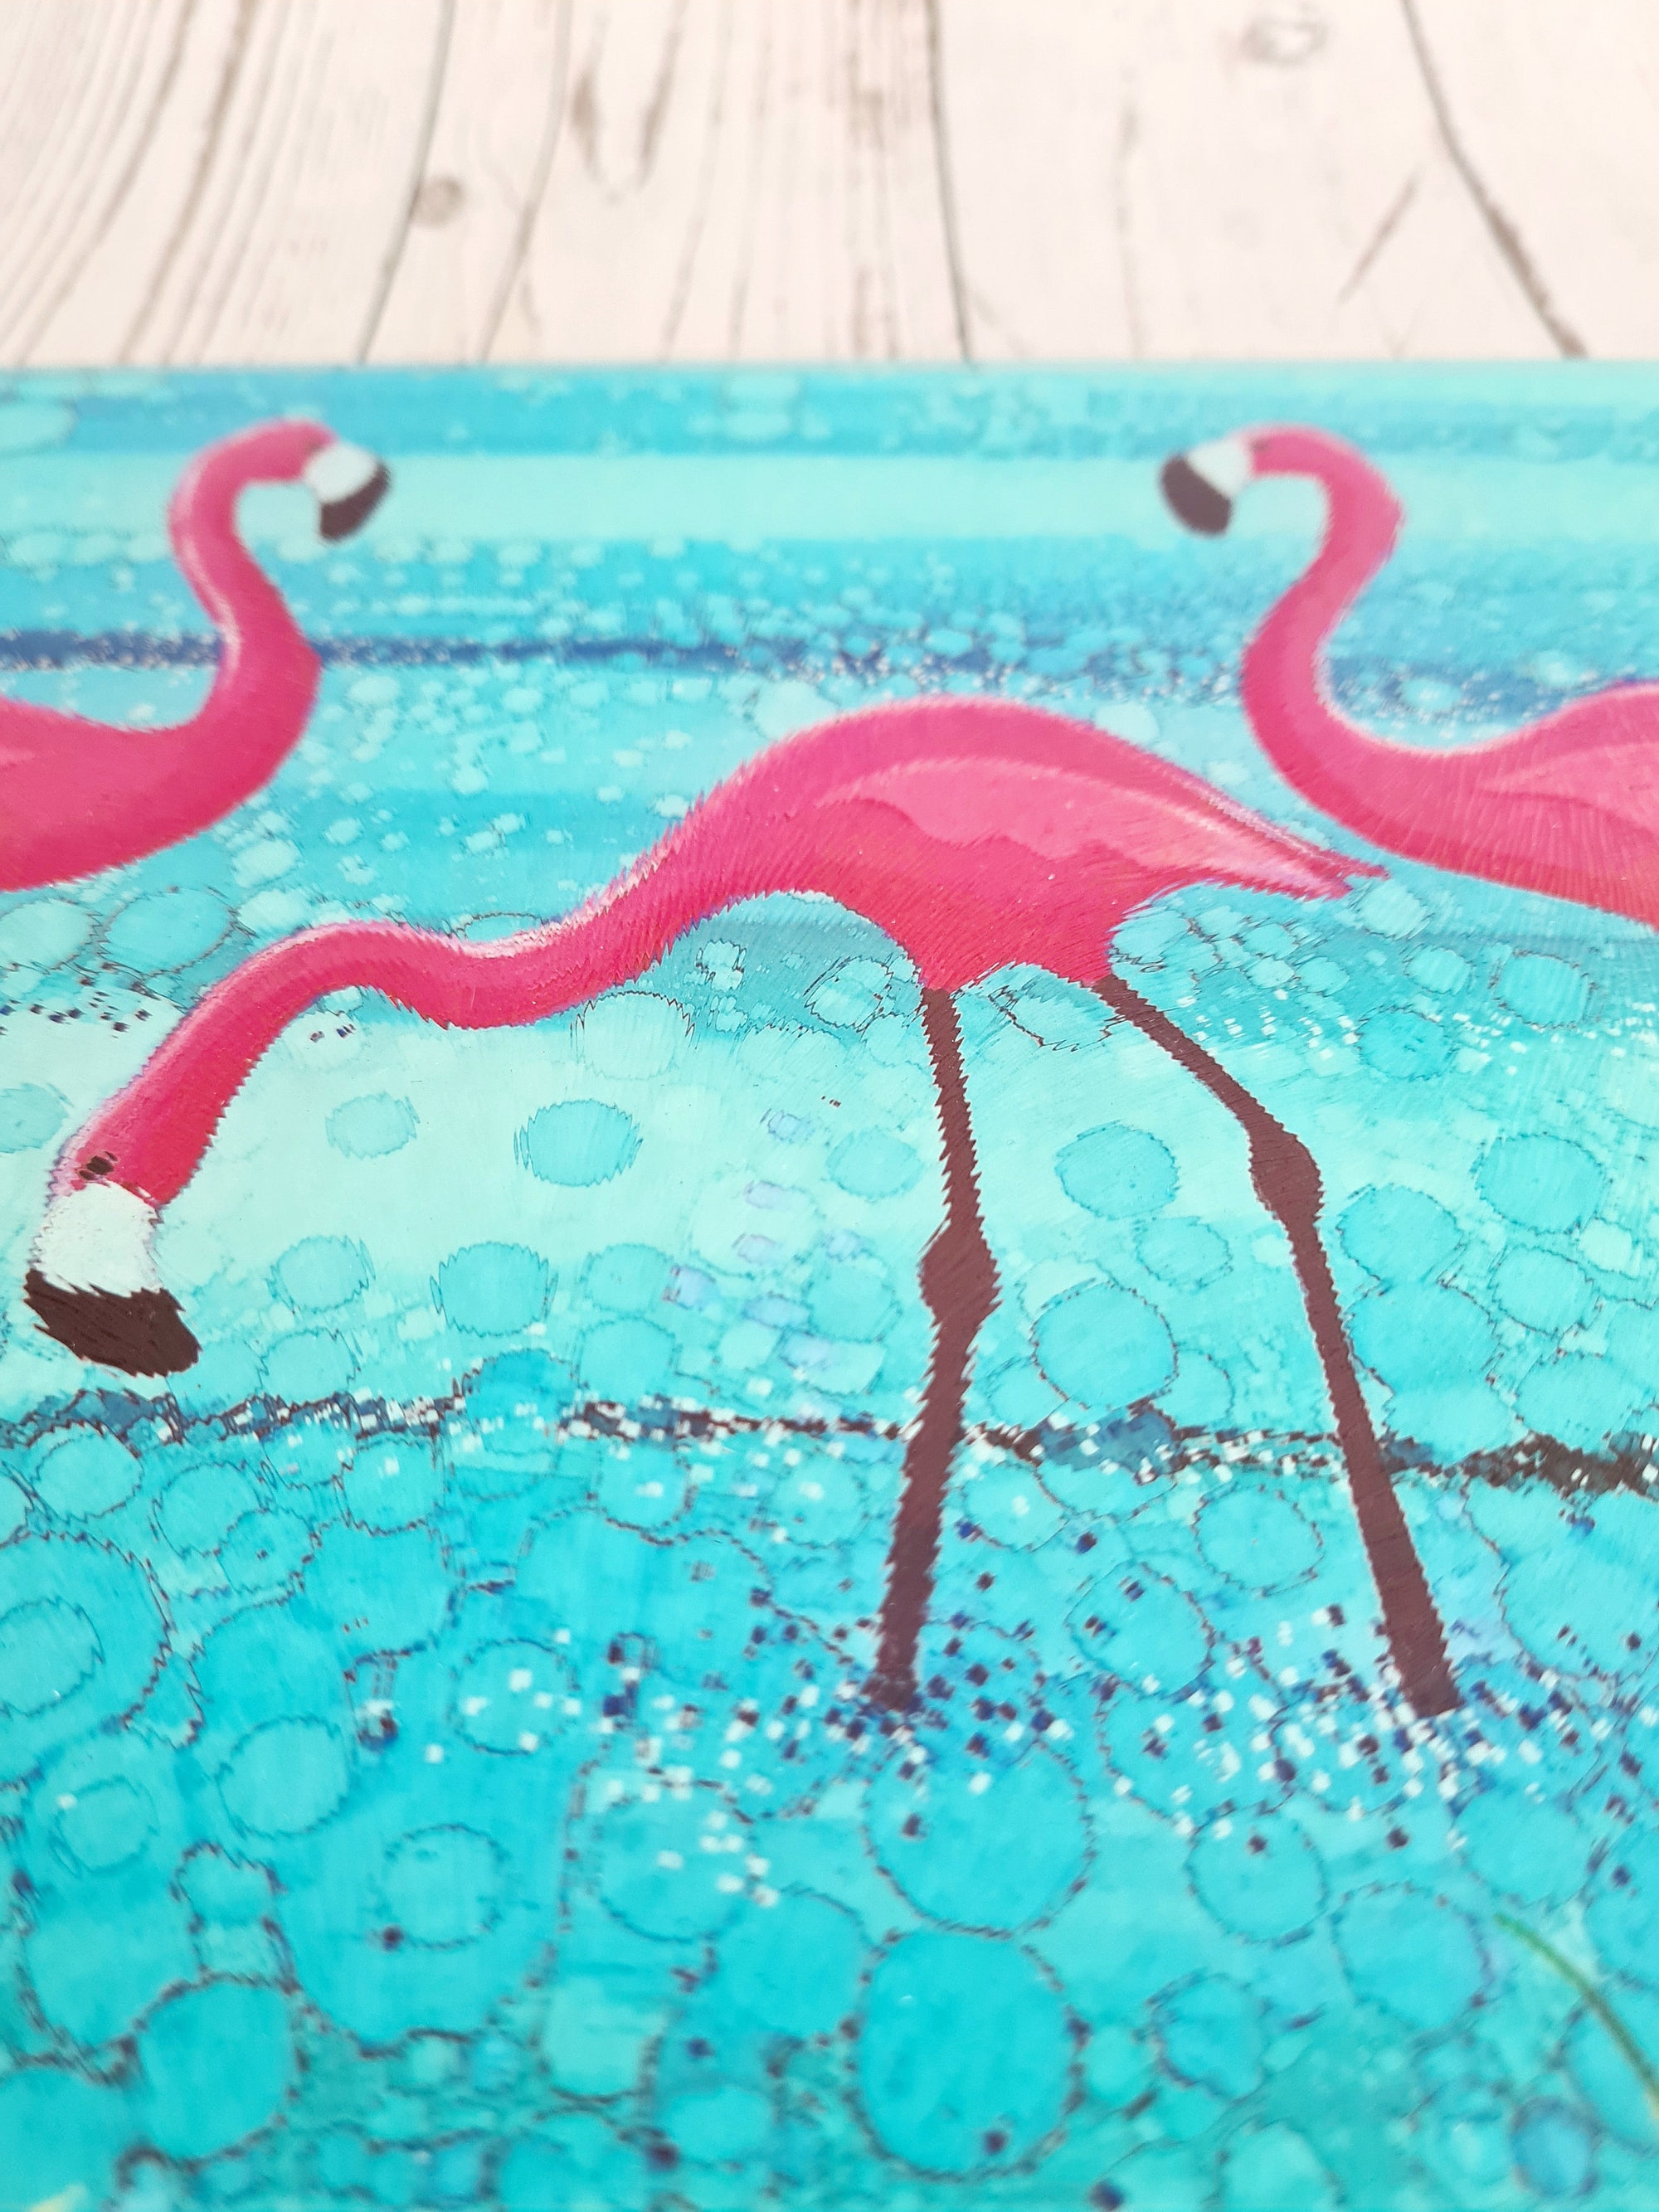 Flamingo Tempered Glass Chopping Board, Glass Placemats, Moonlight Animal, pink flamingo